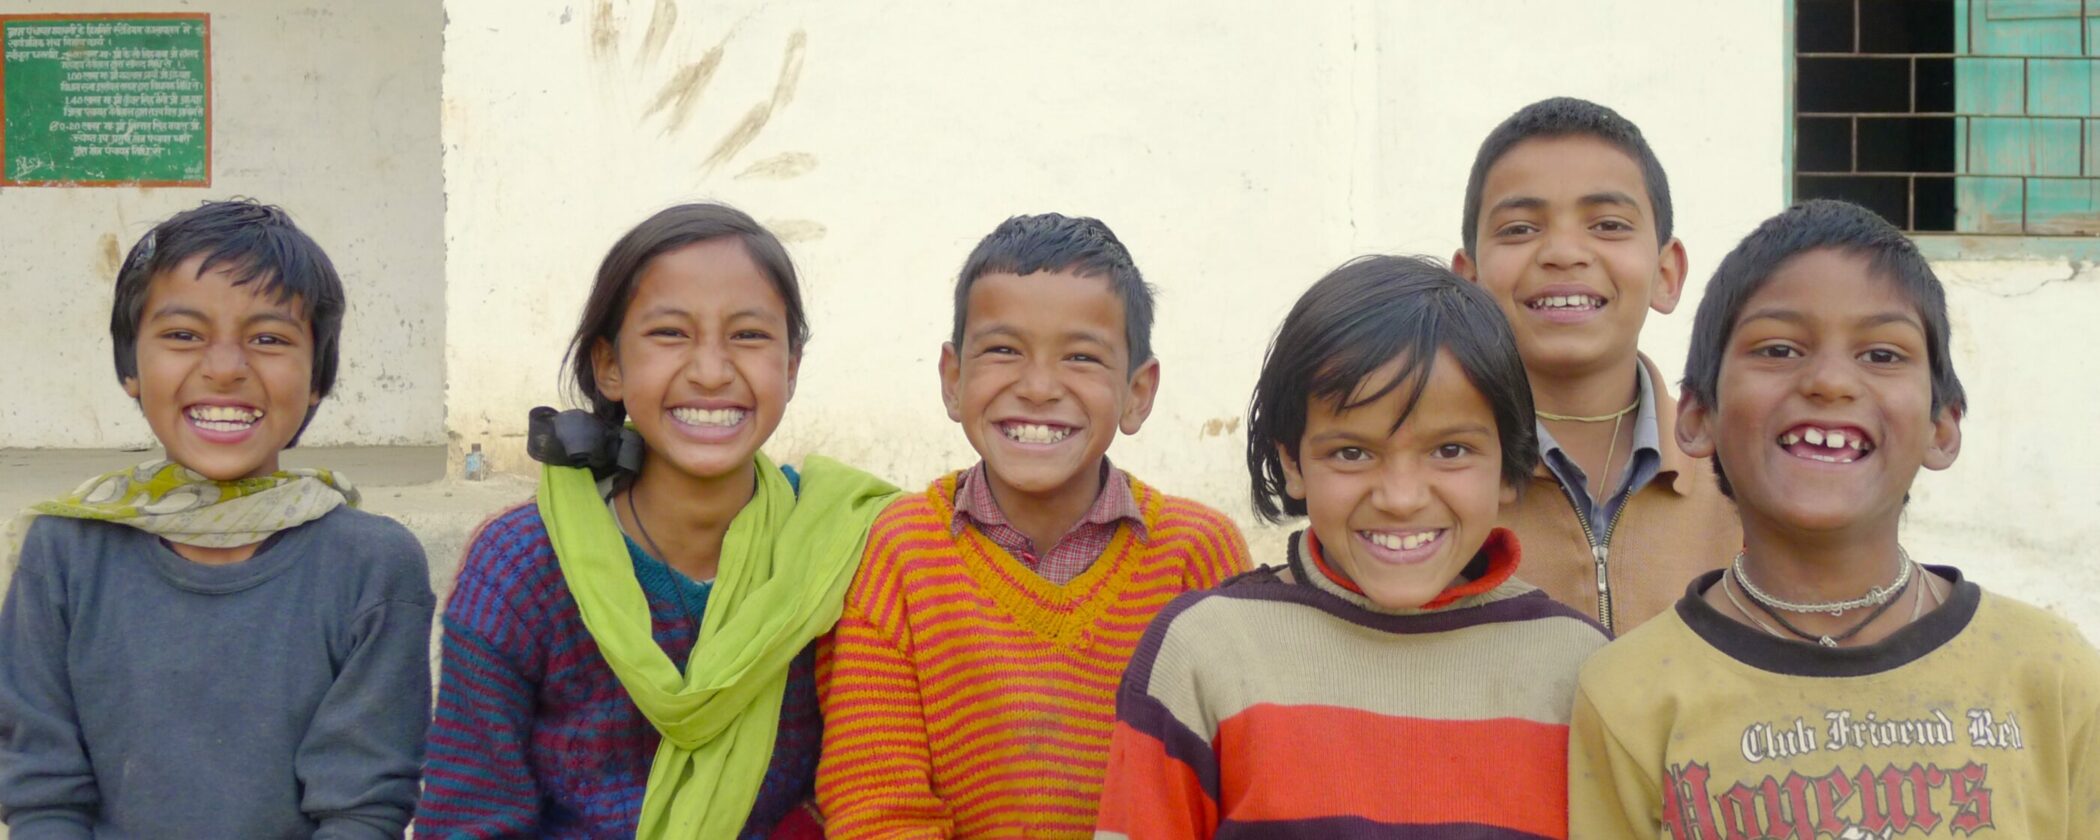 A joyful group of children posing happily for a photograph.